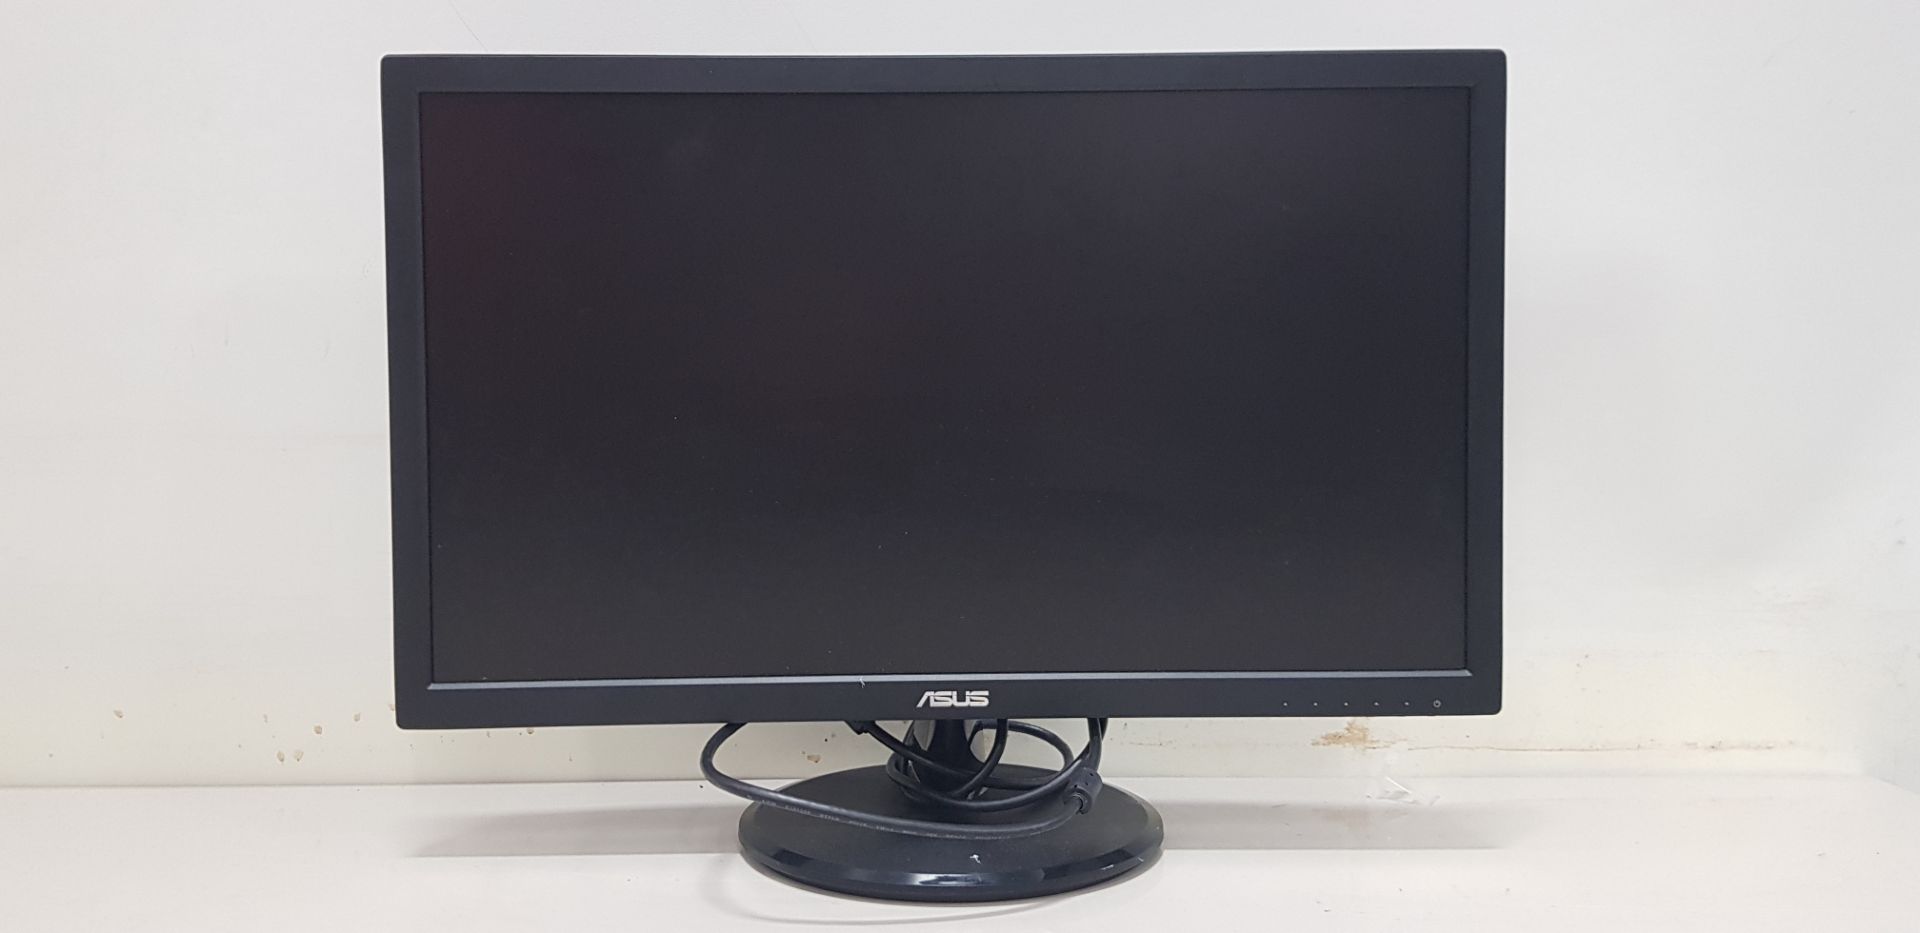 6 X ASUS 21.5 LCD MONITORS WITH POWER LEADS MODEL NUMBER VP228